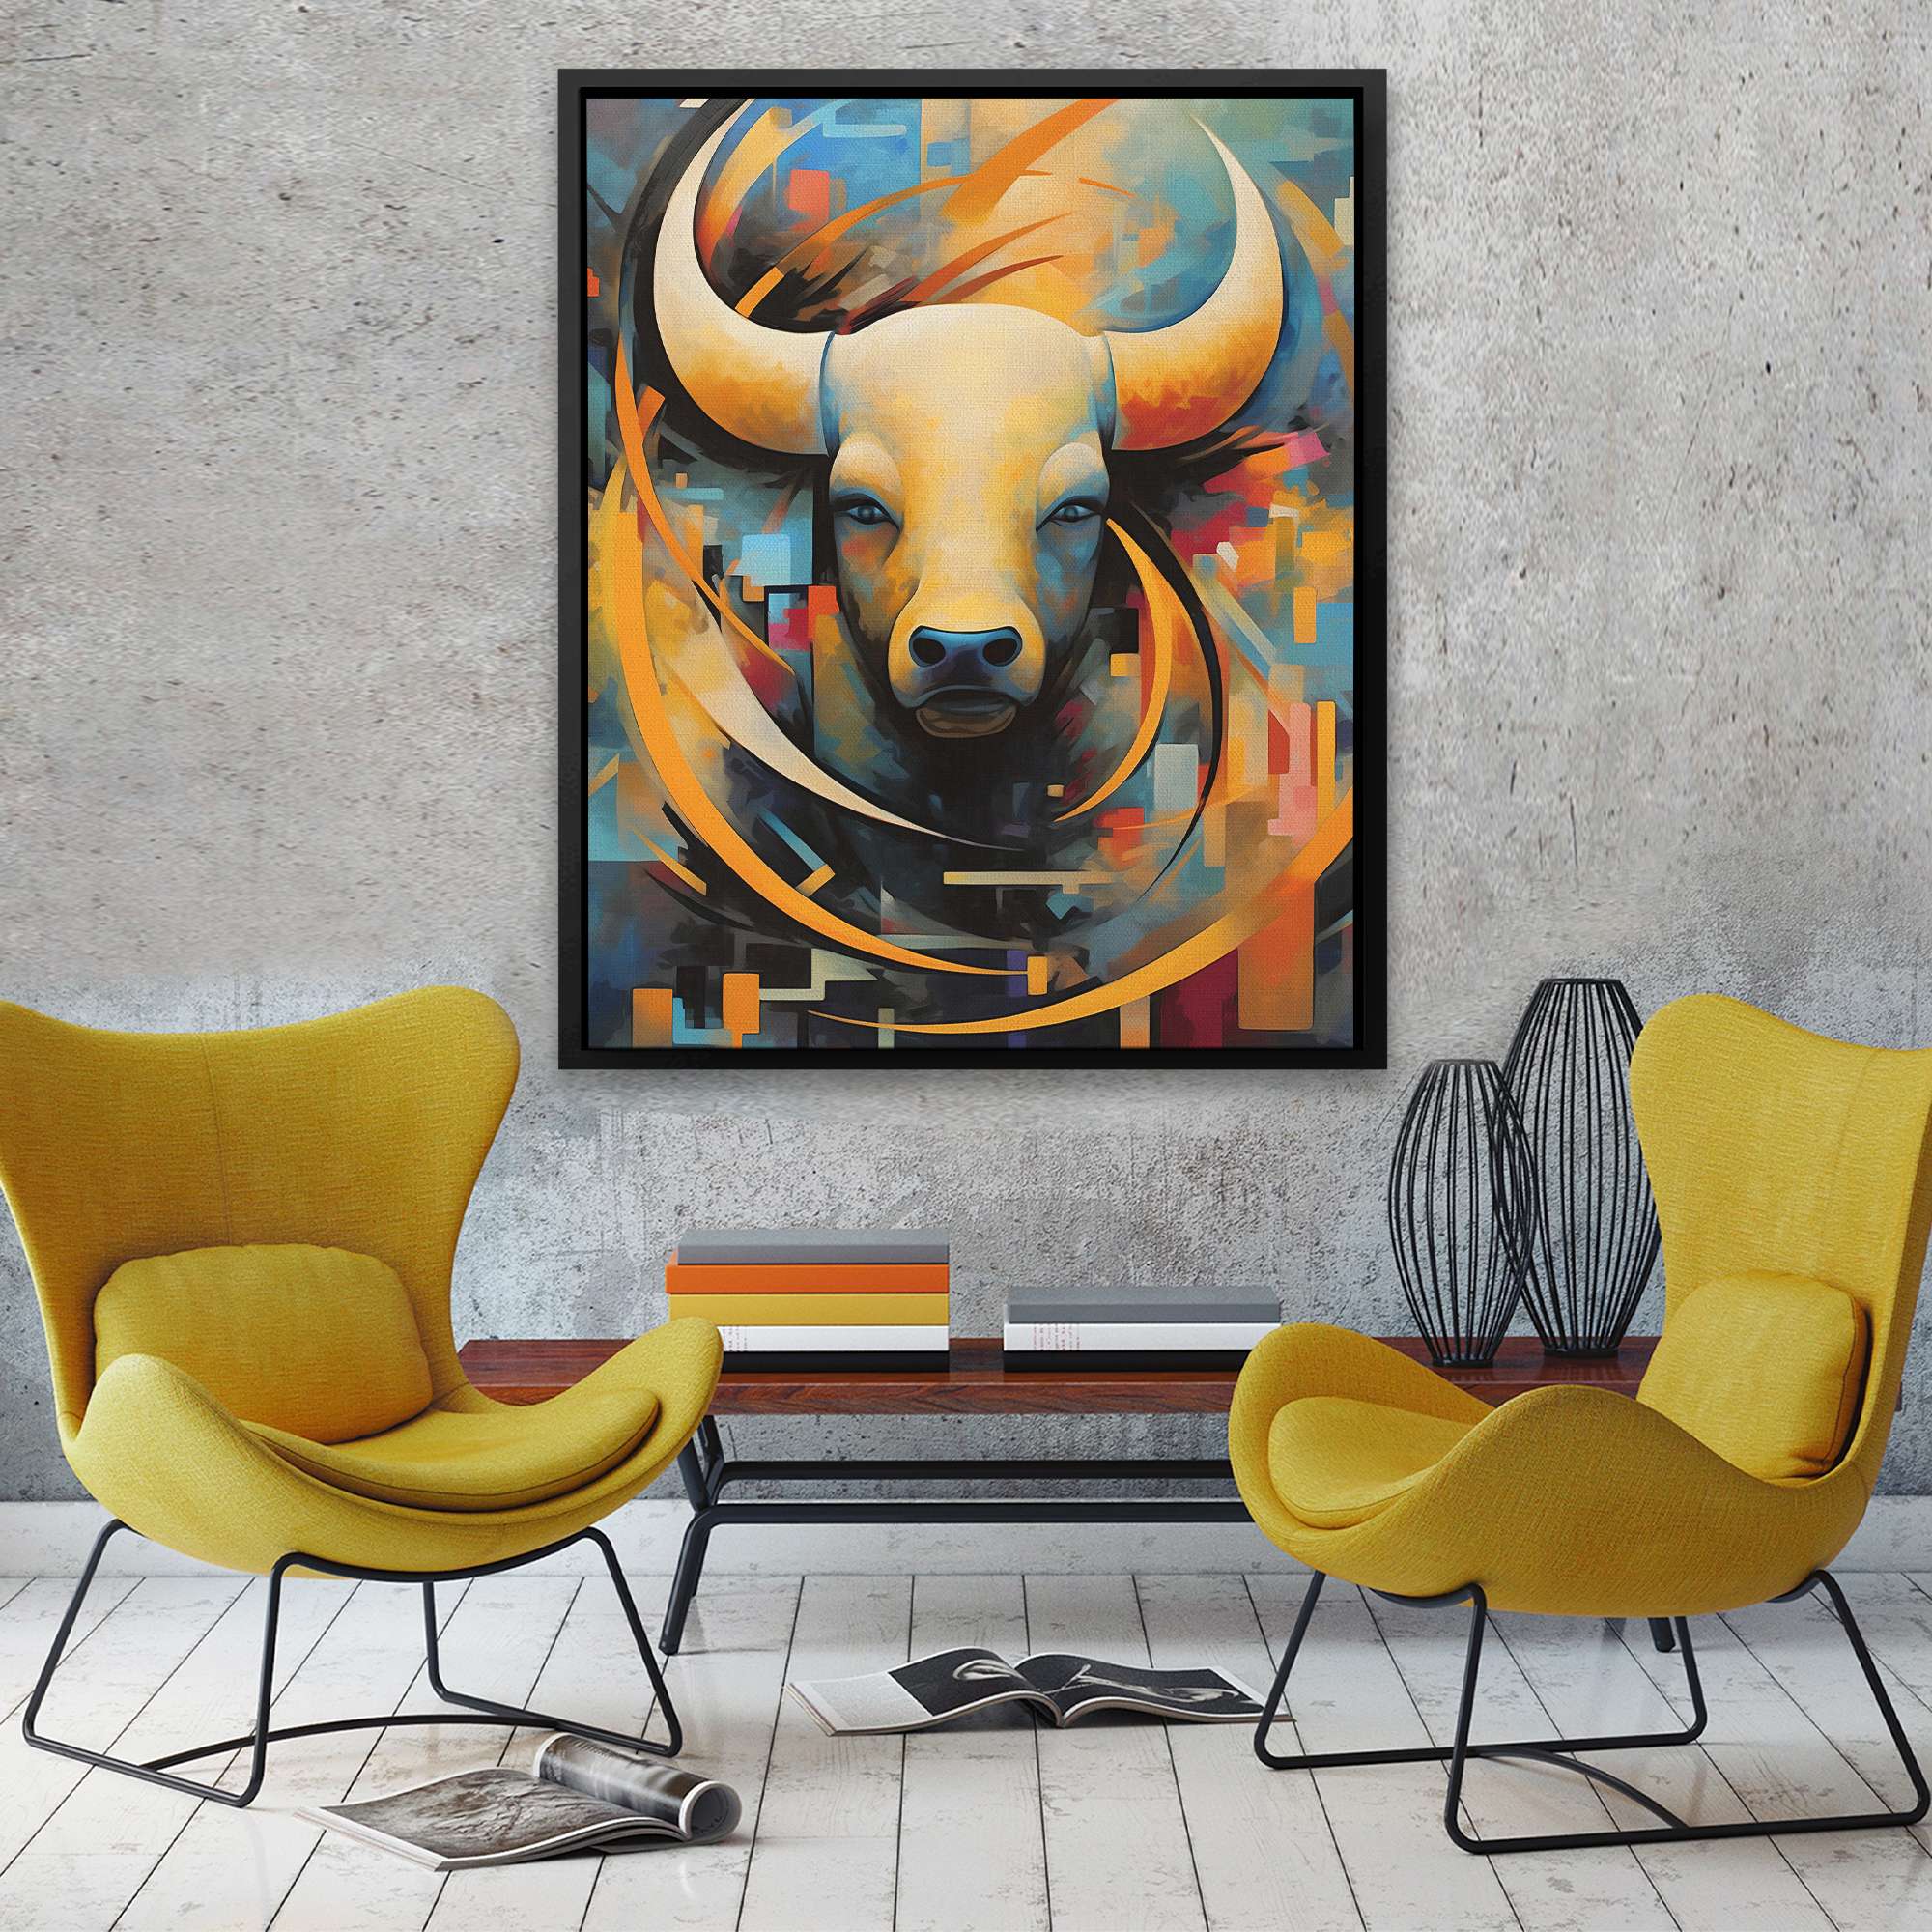 Charging Colors - Luxury Wall Art - Canvas Print